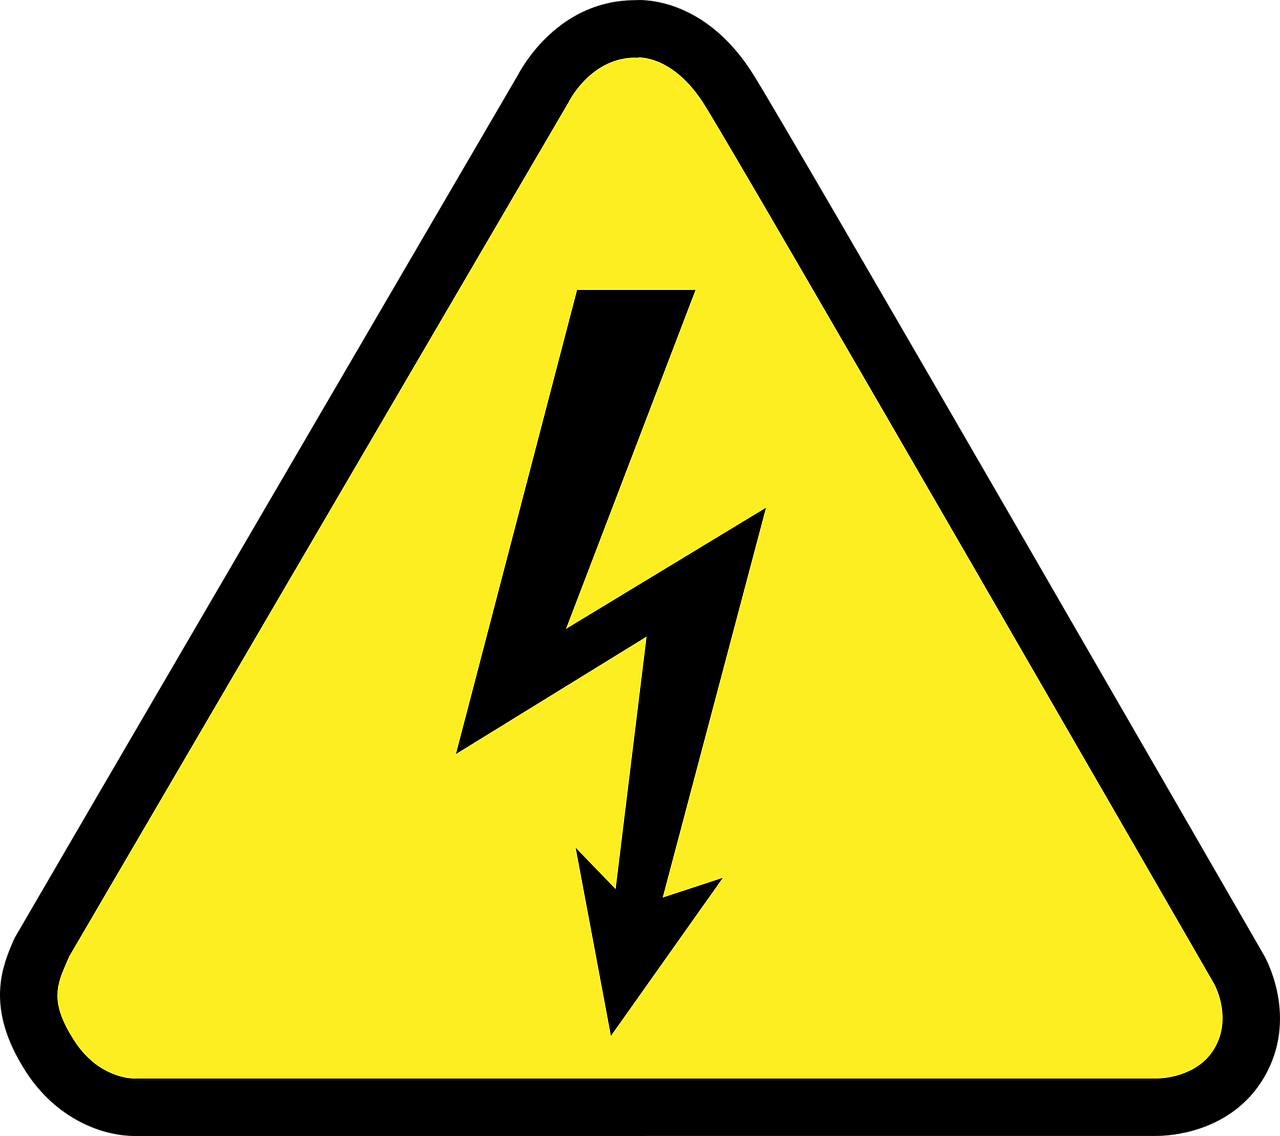 Electrical Safety Warning sign